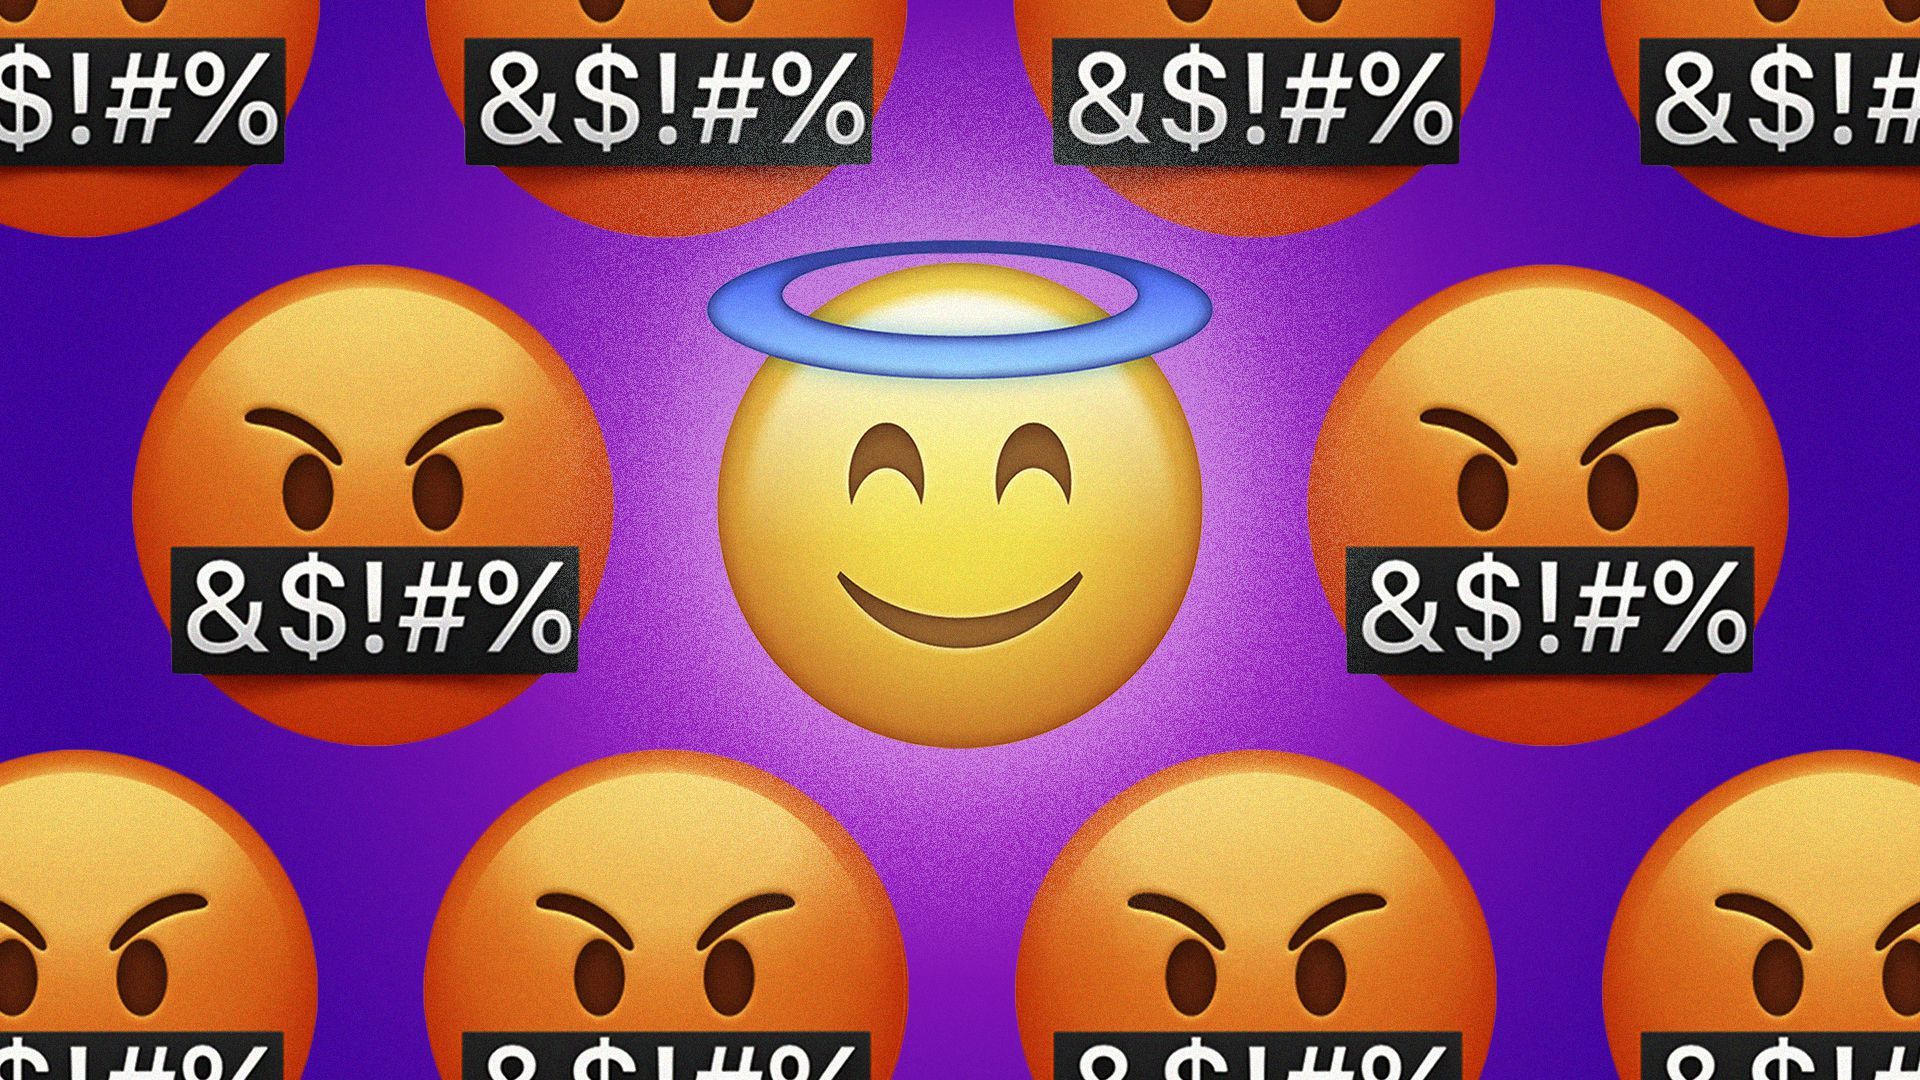 Illustration of an angel emoji, surrounded by angry emojis.